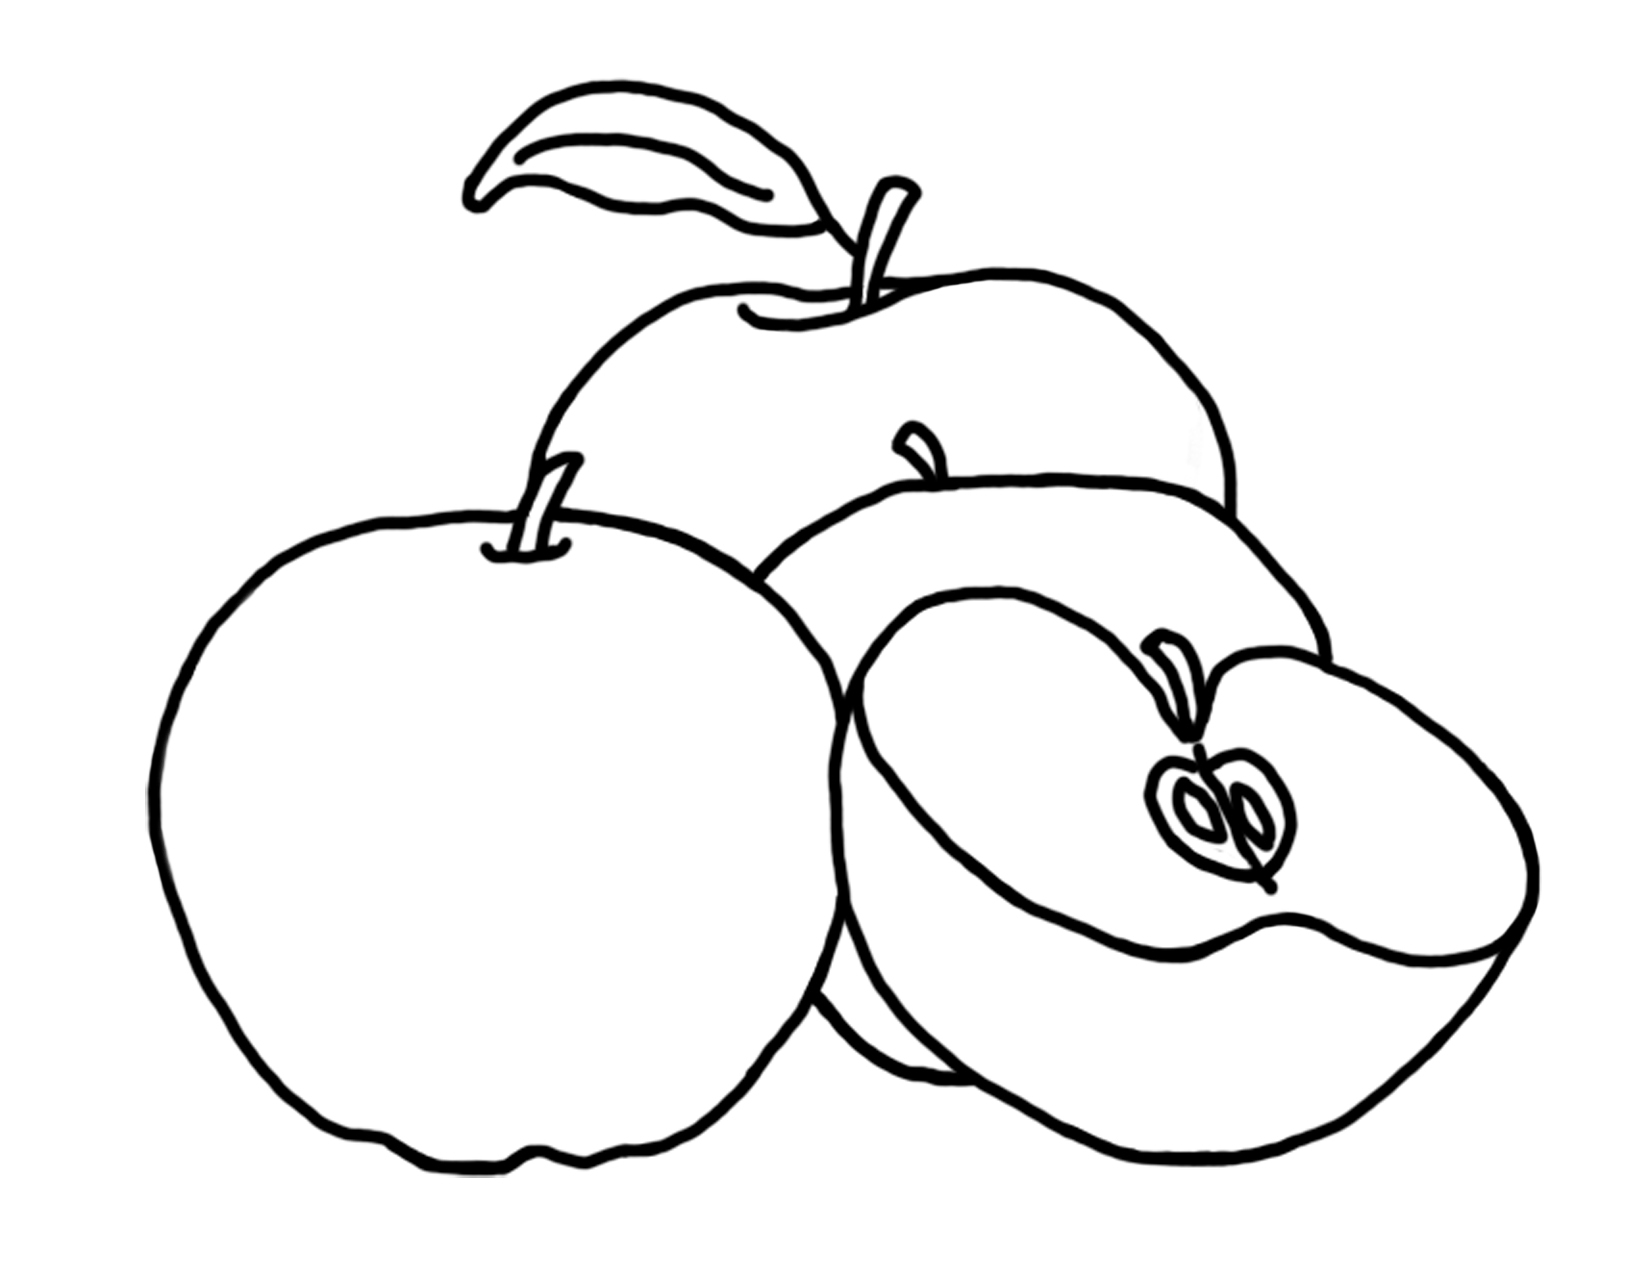 Printable Apple Coloring Pages Free Printable Apple Coloring Pages For Kids